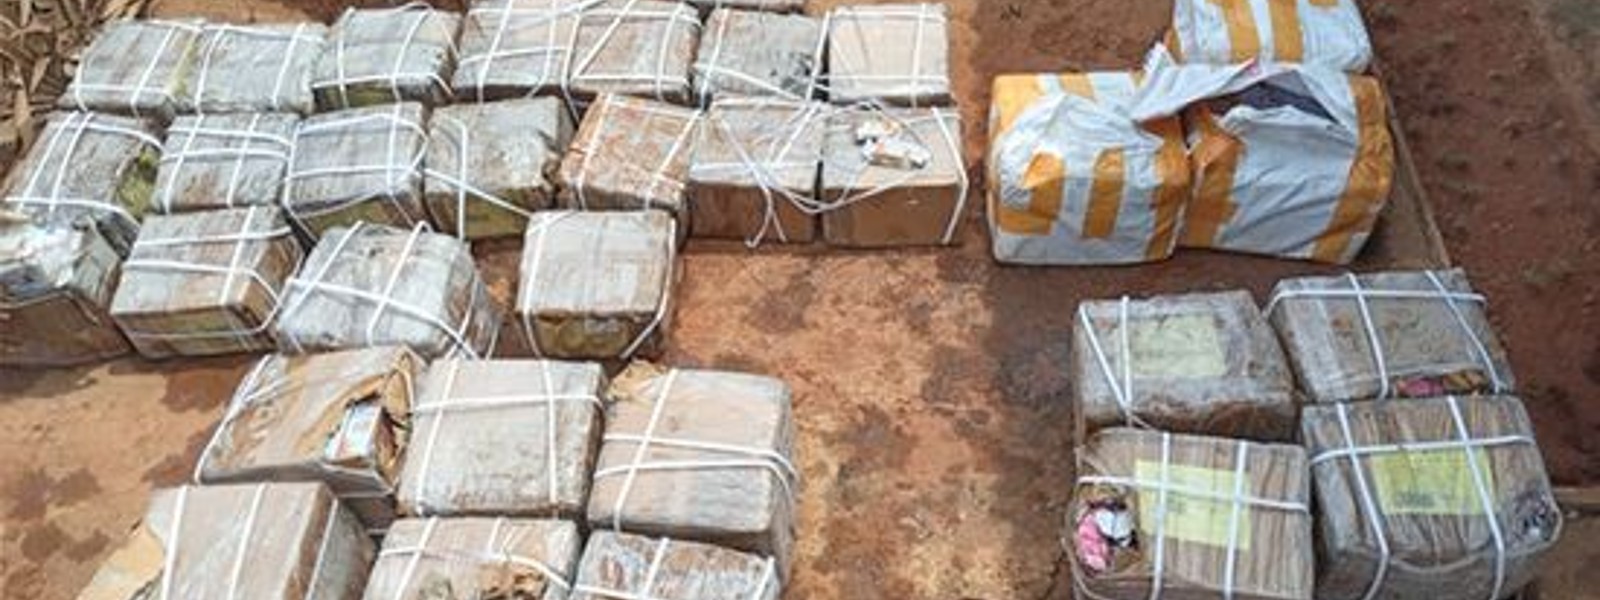 SL Navy recovers prescription drugs worth Rs. 4.5 million in Mannar